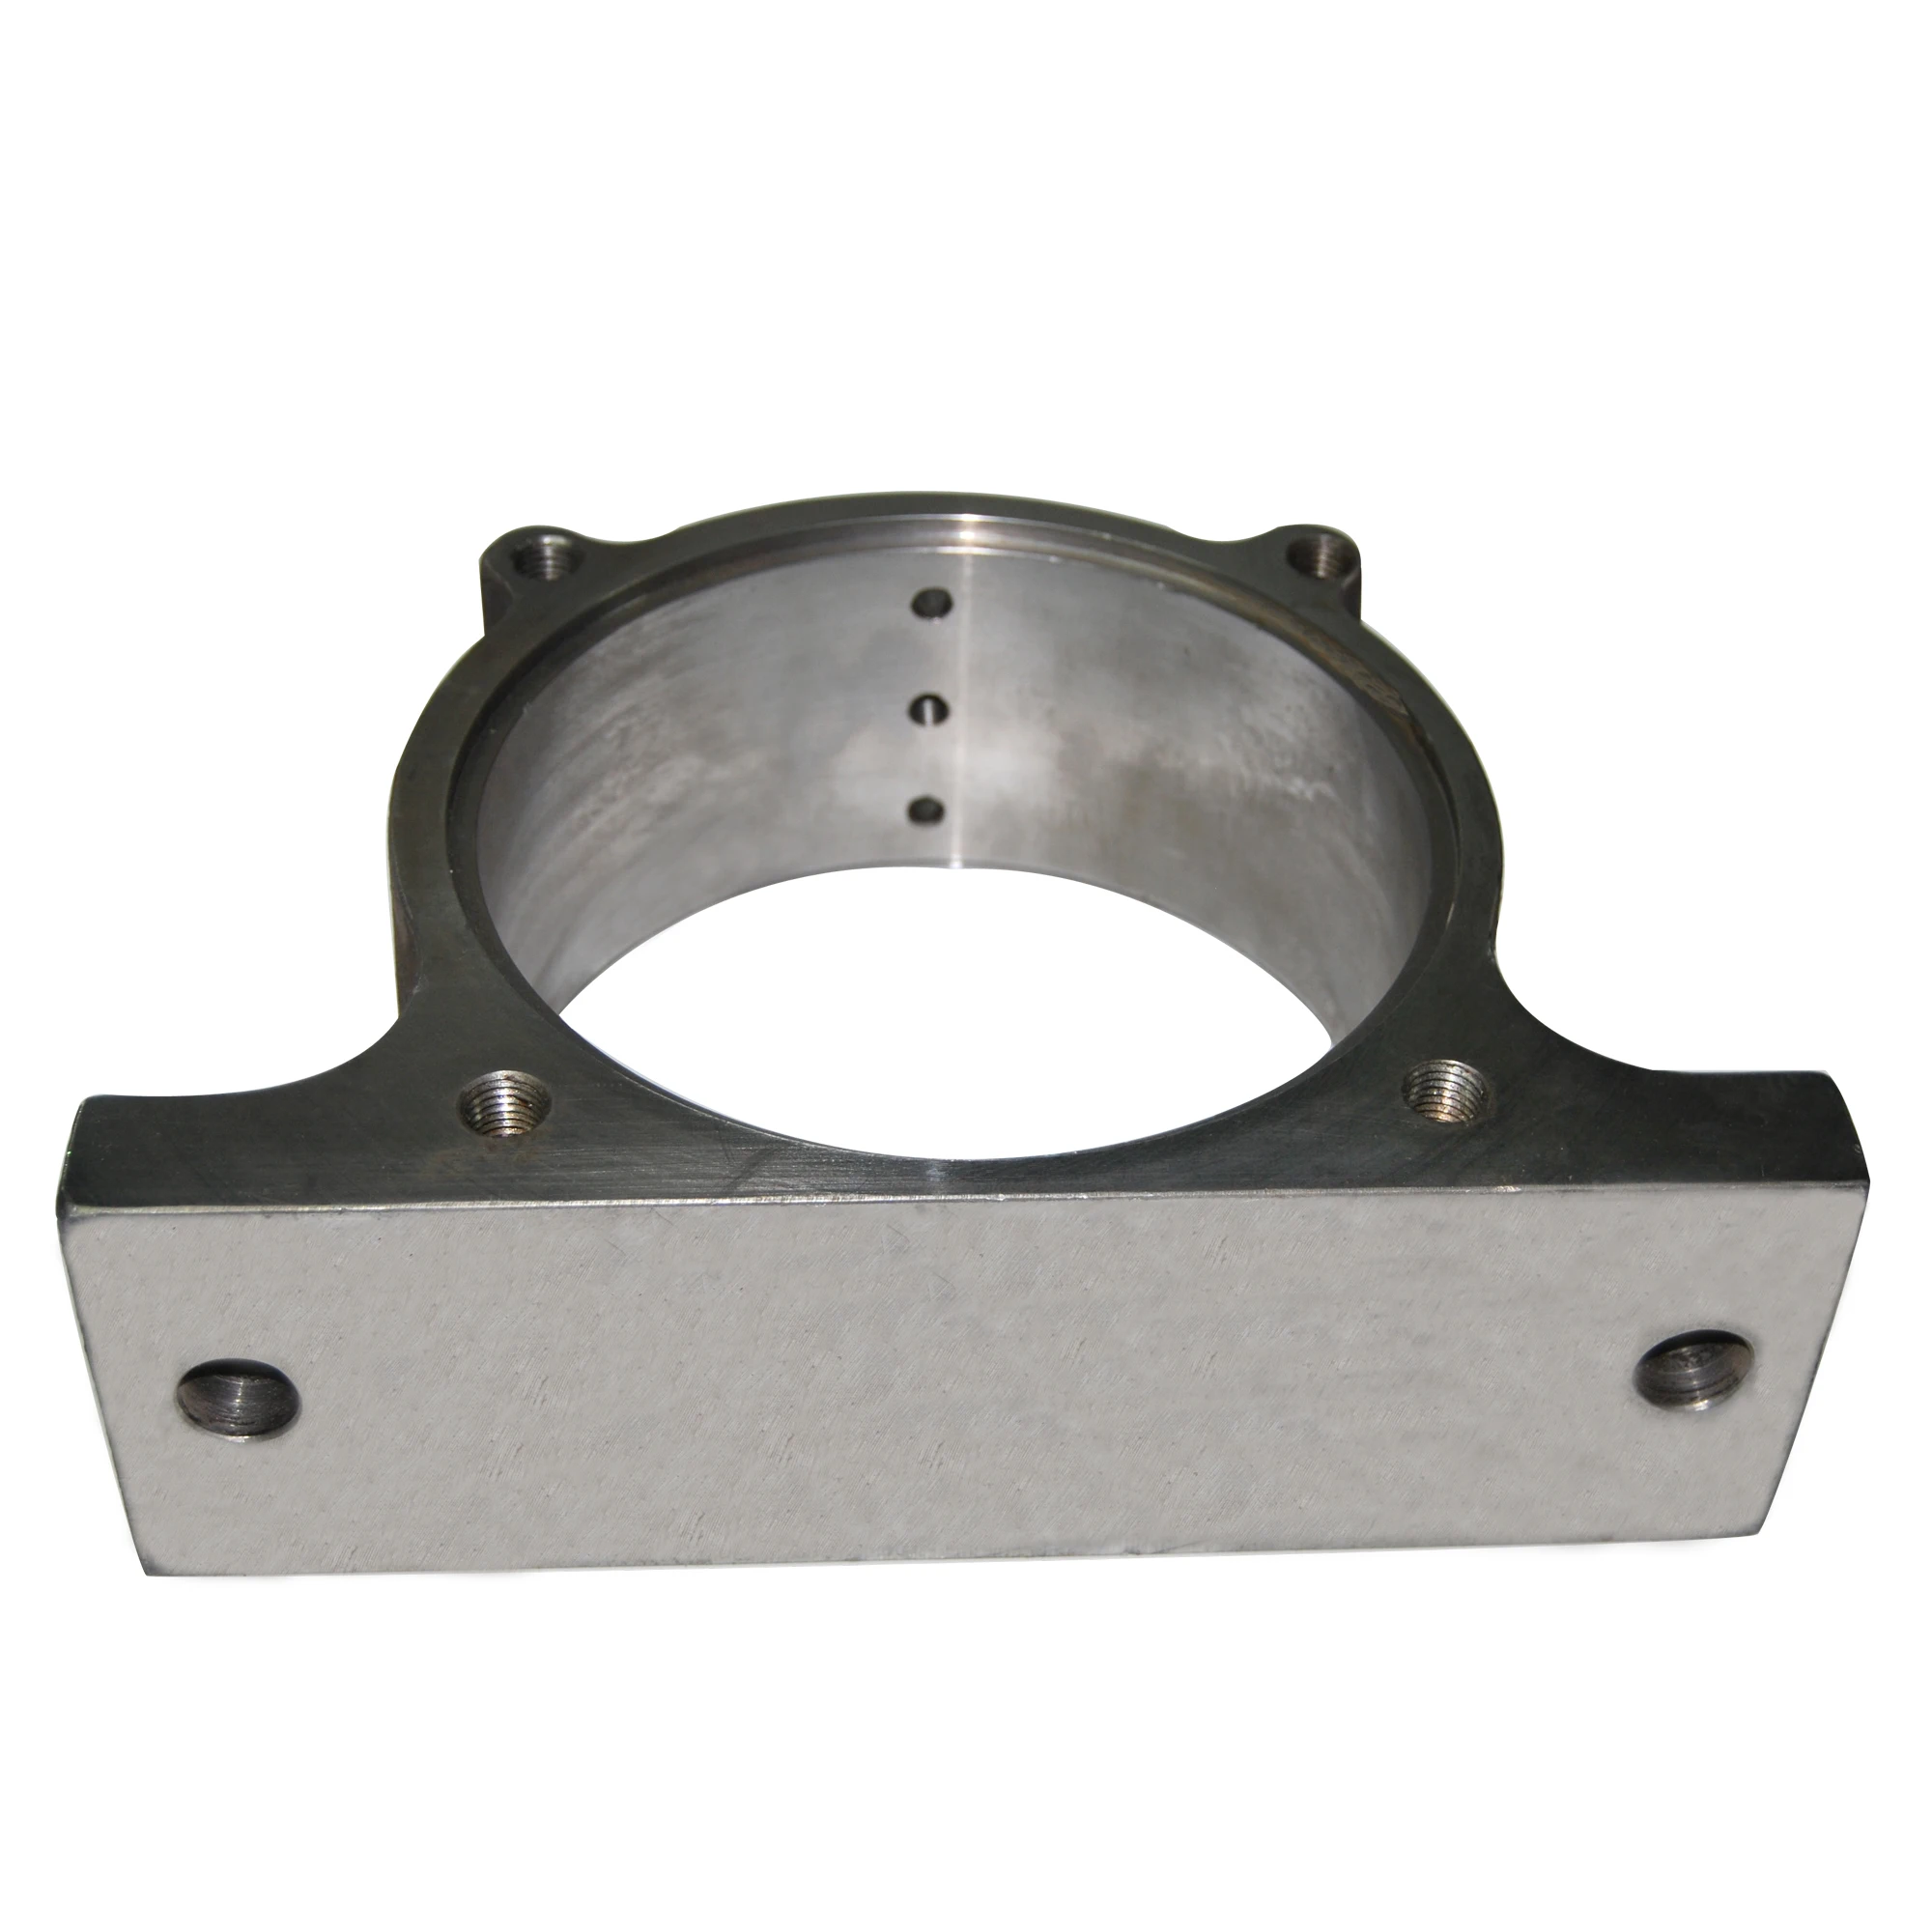 Cast Precision Flange Housing Pillow Block Bearing Seat Cover